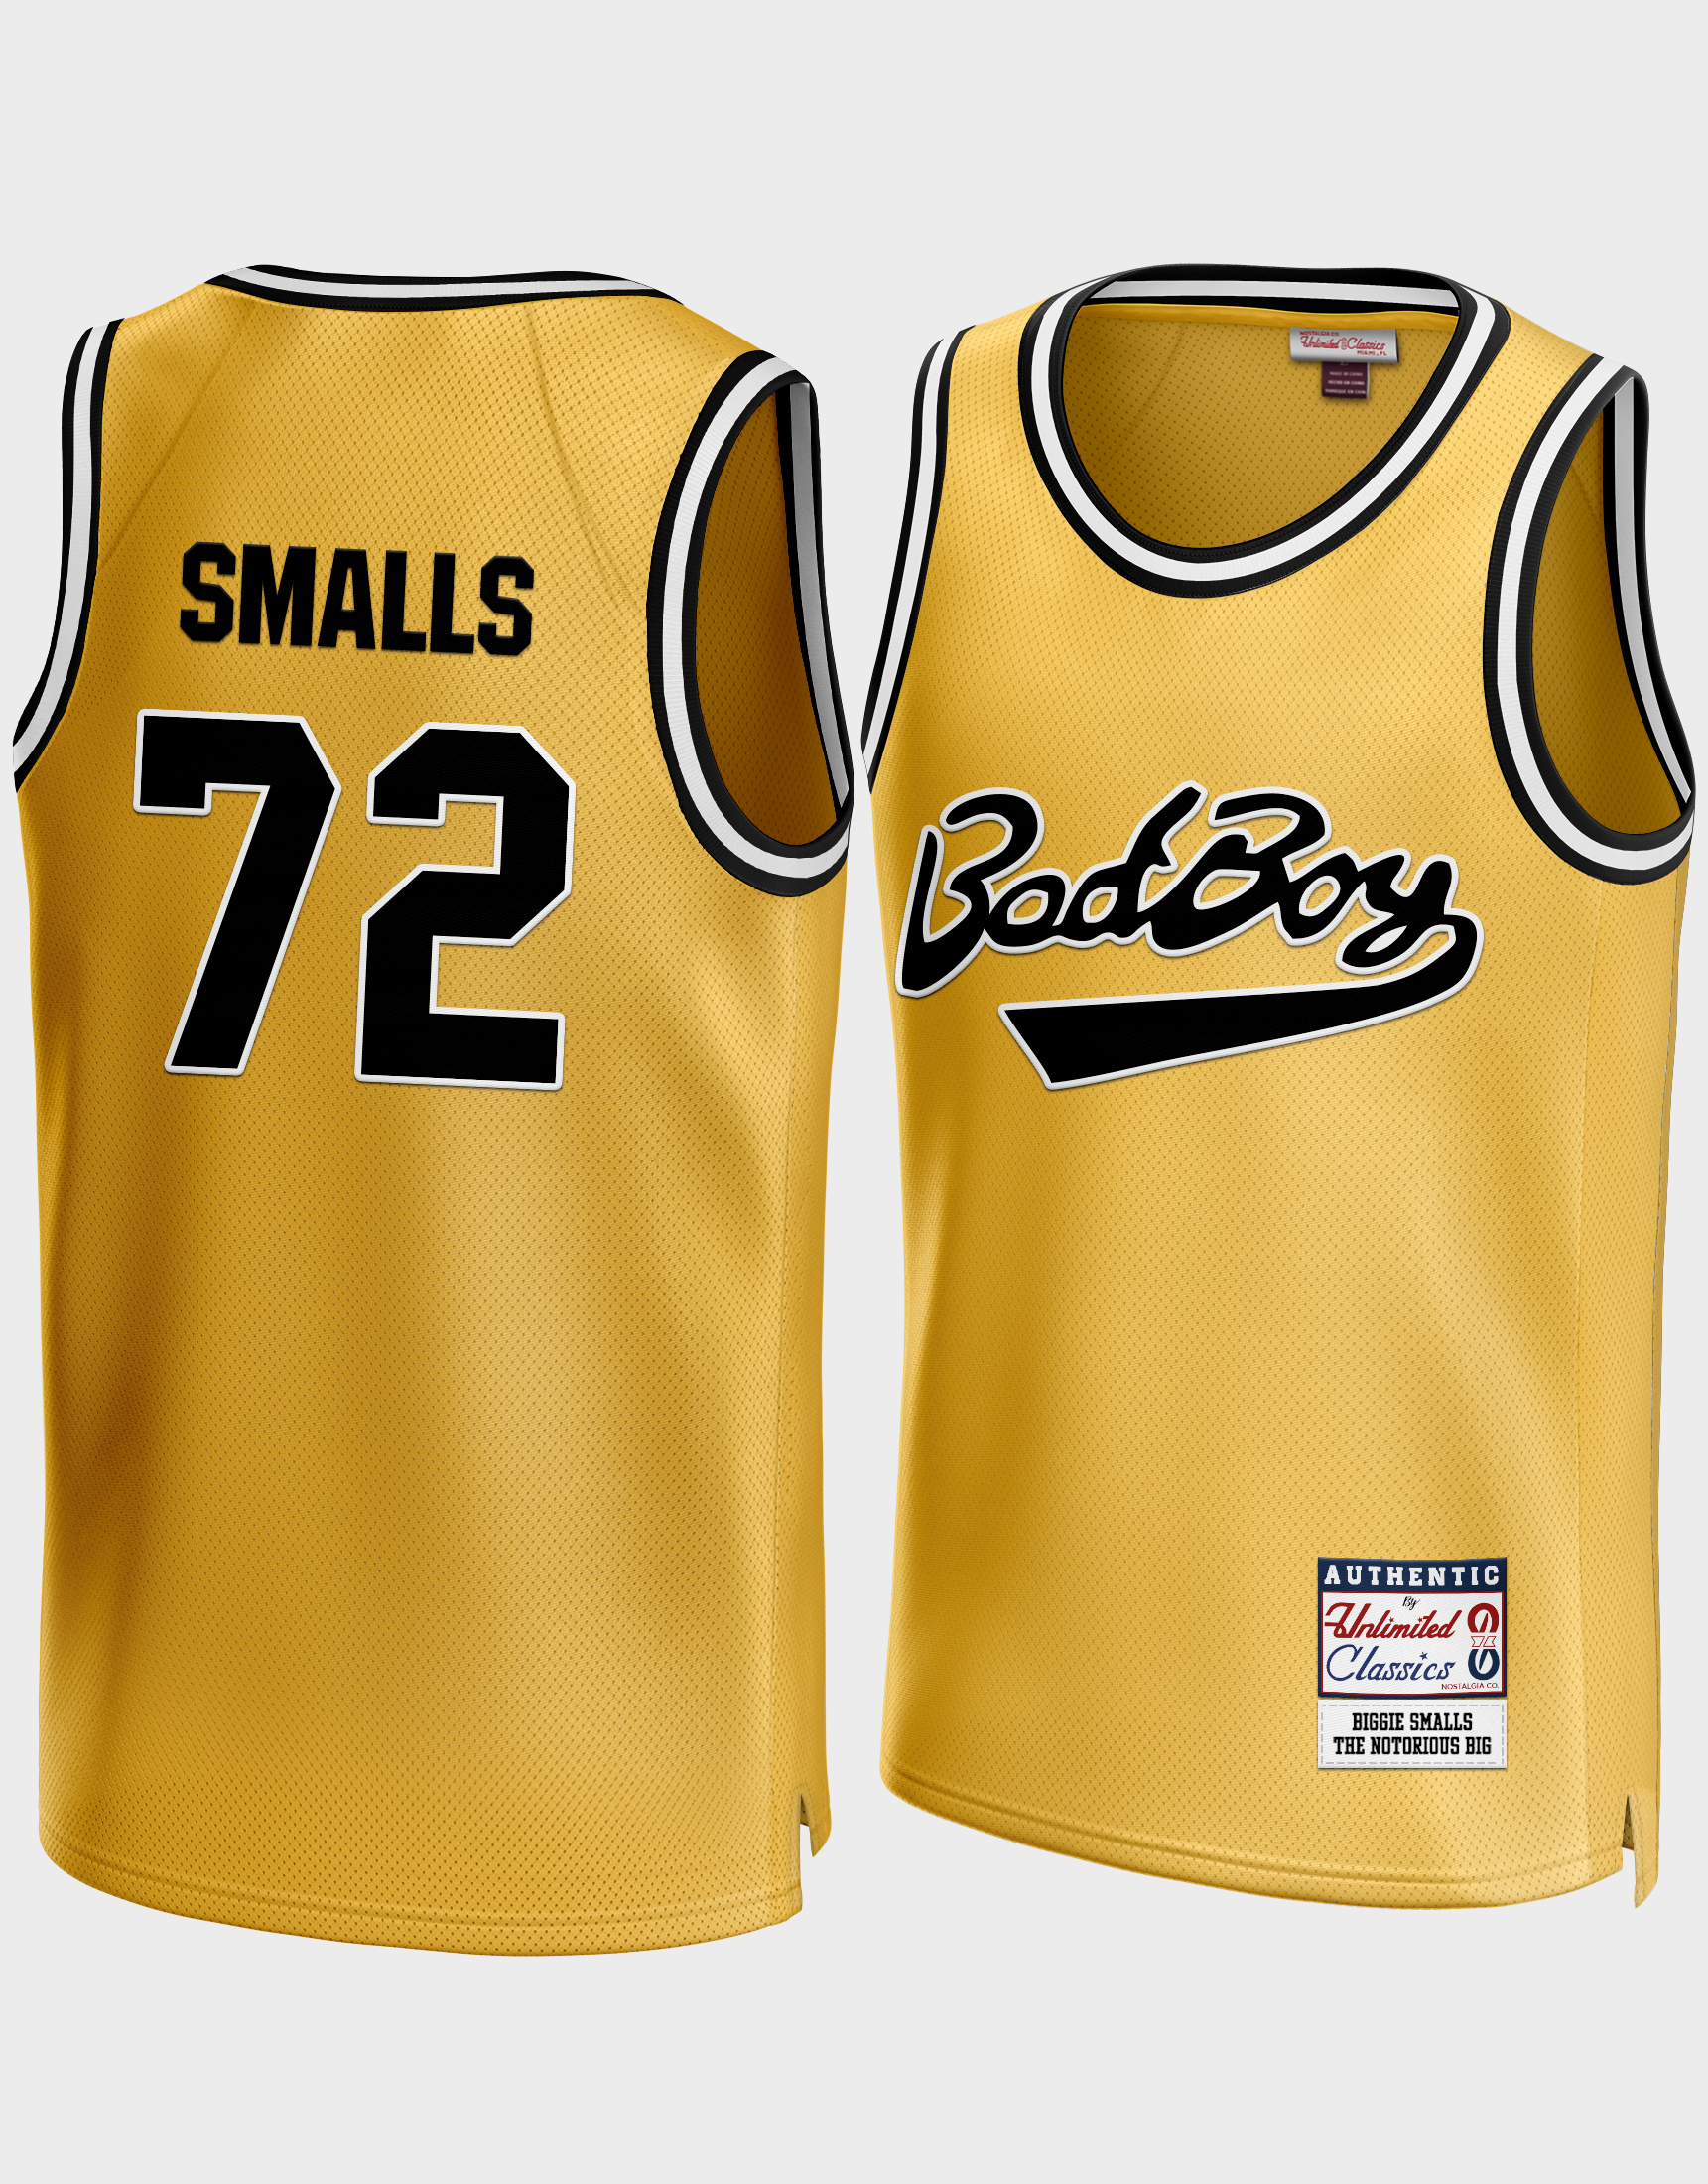 The yellow Bad Boy basketball jersey worn by The Notorious B.I.G.